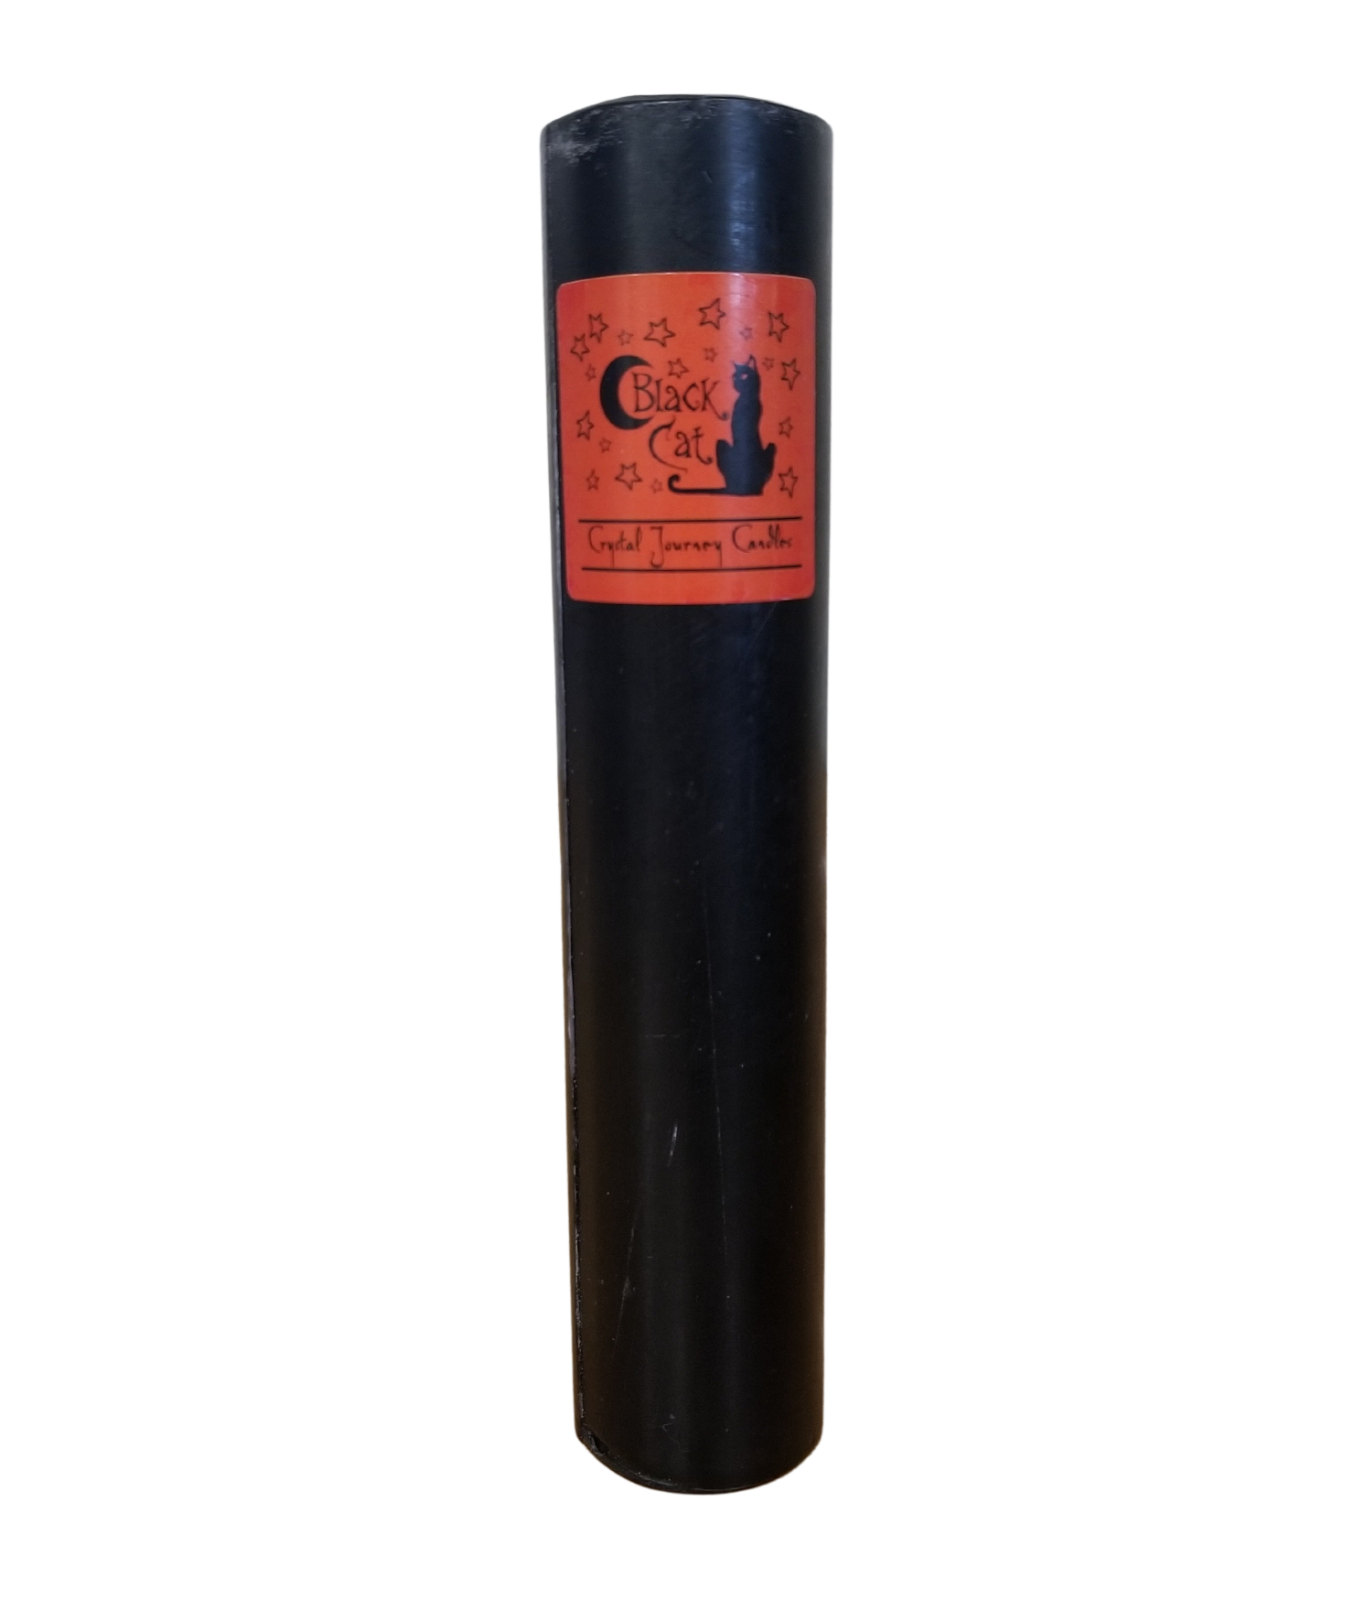 BLACK CAT - Crystal Journey Reiki Charged Herbal Magic 7" Pillar Candle - $11.05